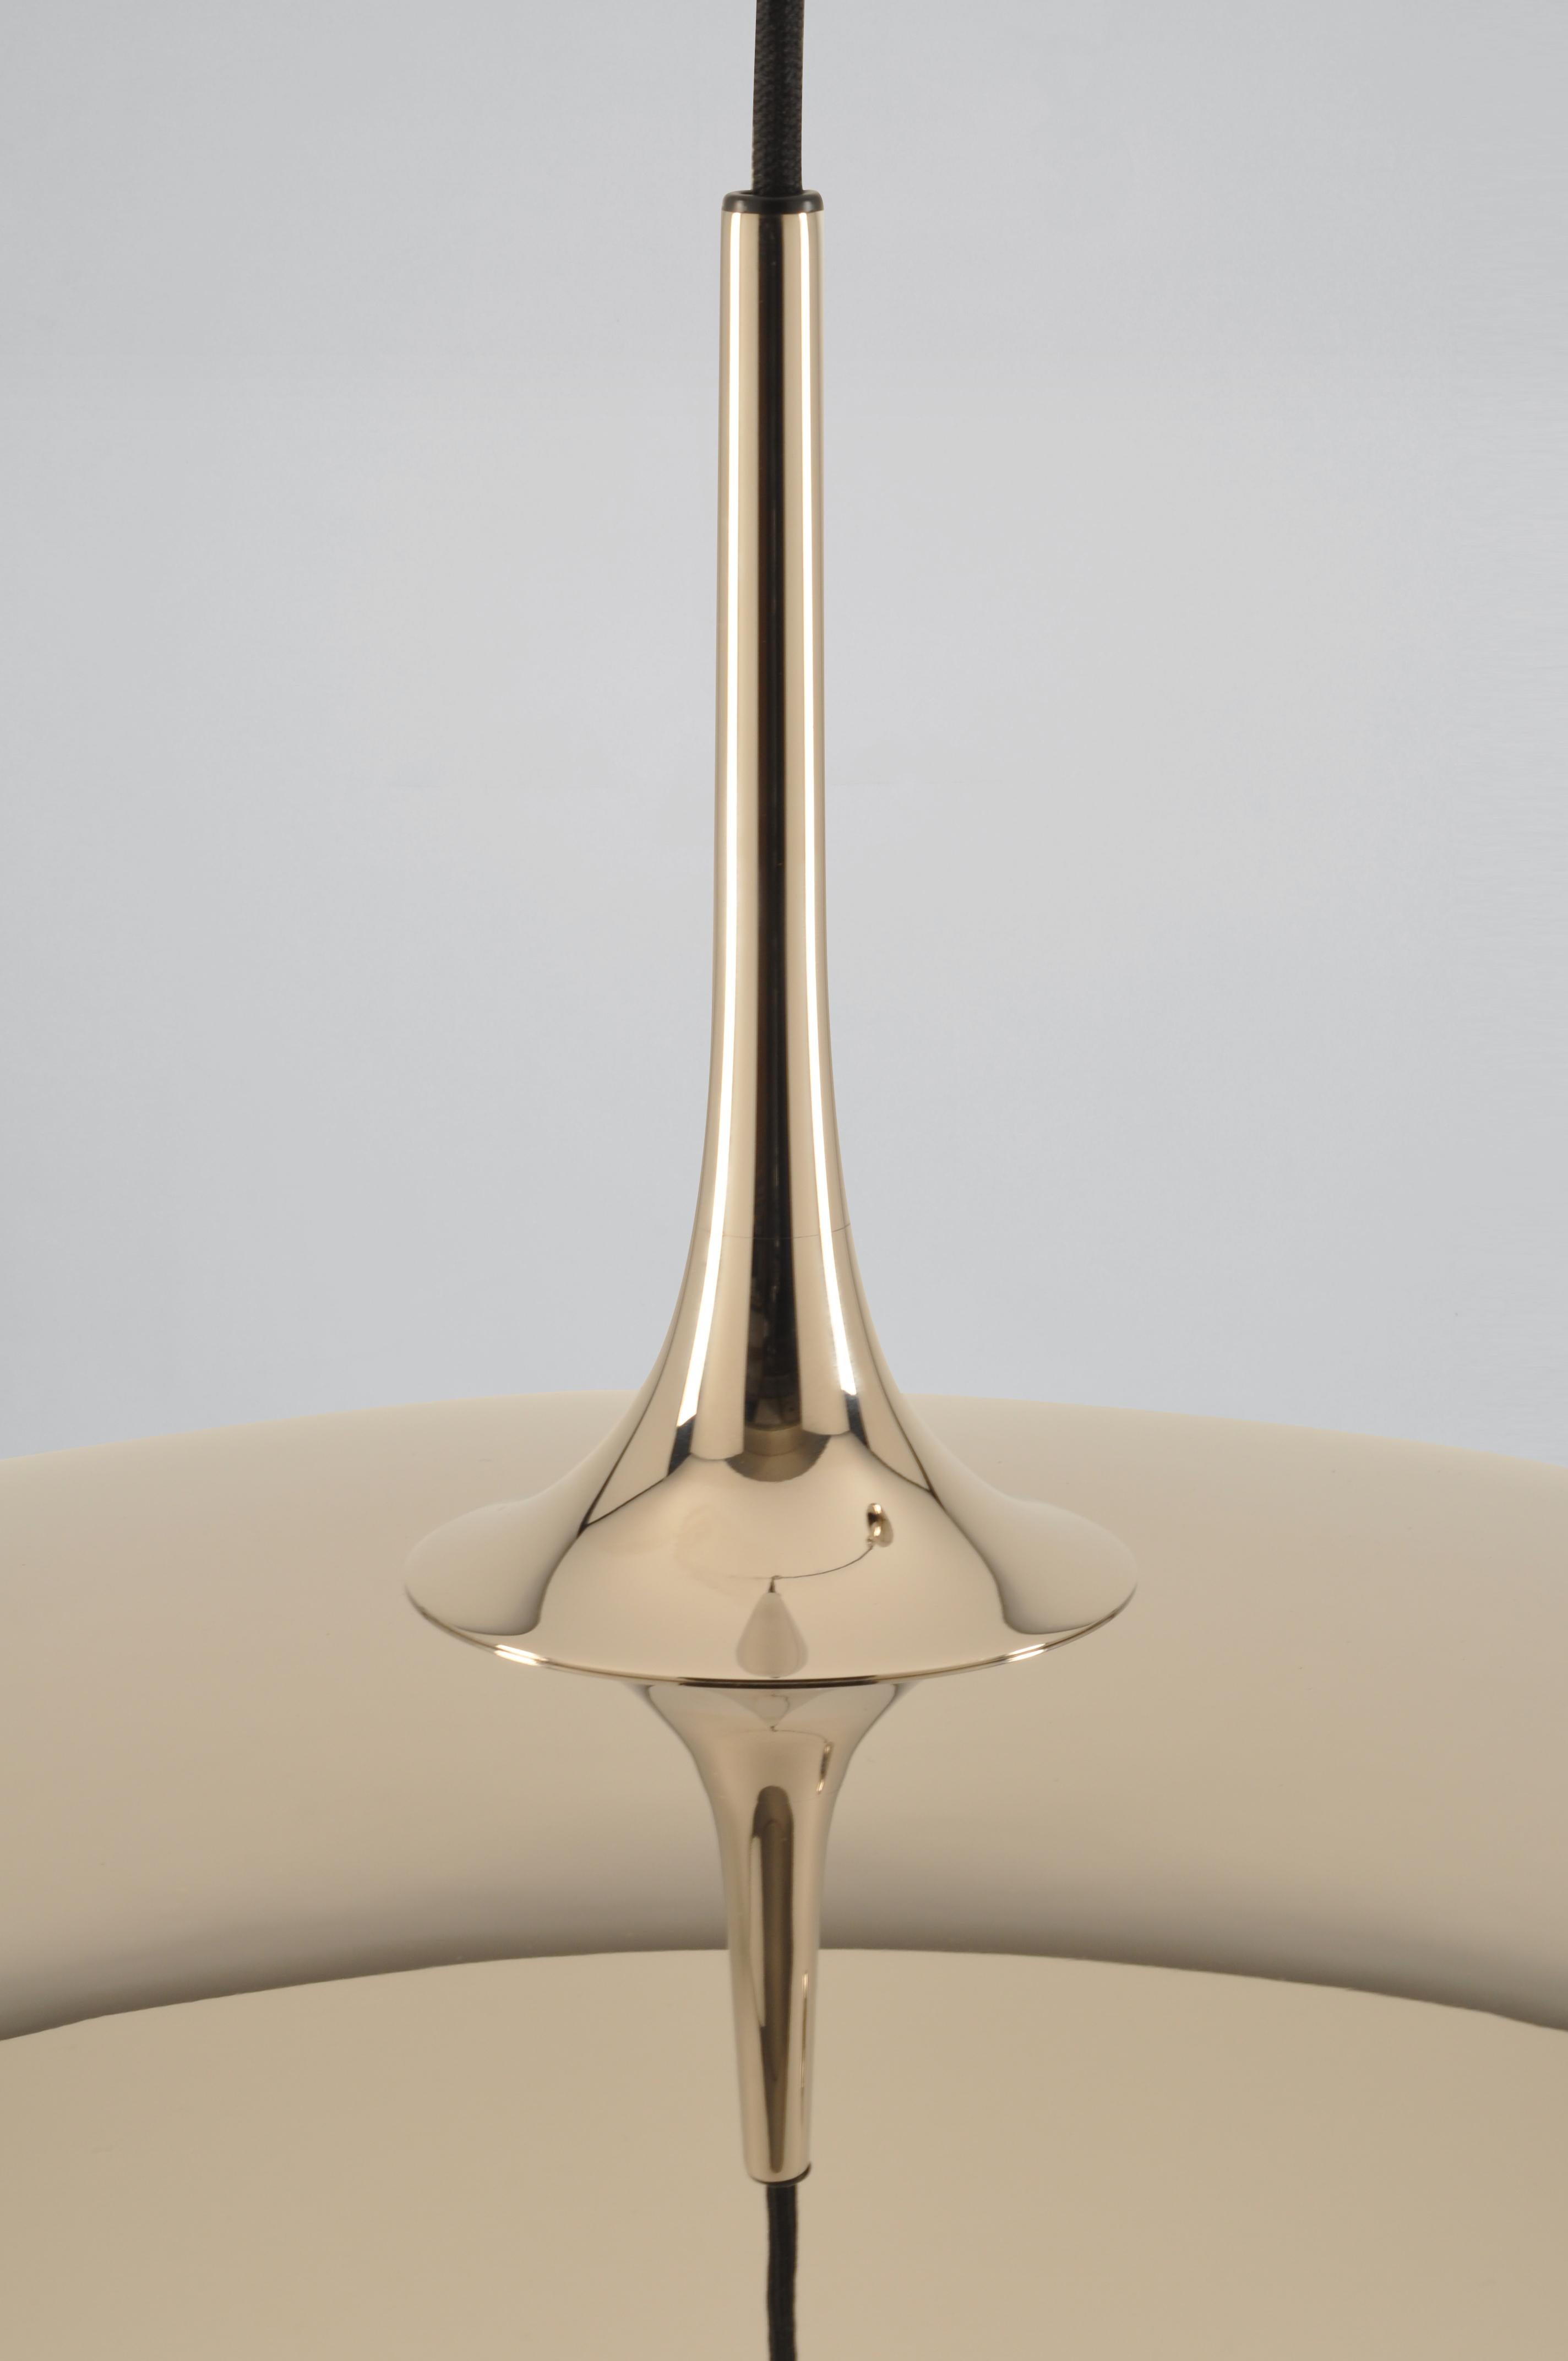 Mid-Century Modern Florian Schulz Onos 55 Counterbalance Pendant Lamp in Polished Brass or nickel For Sale